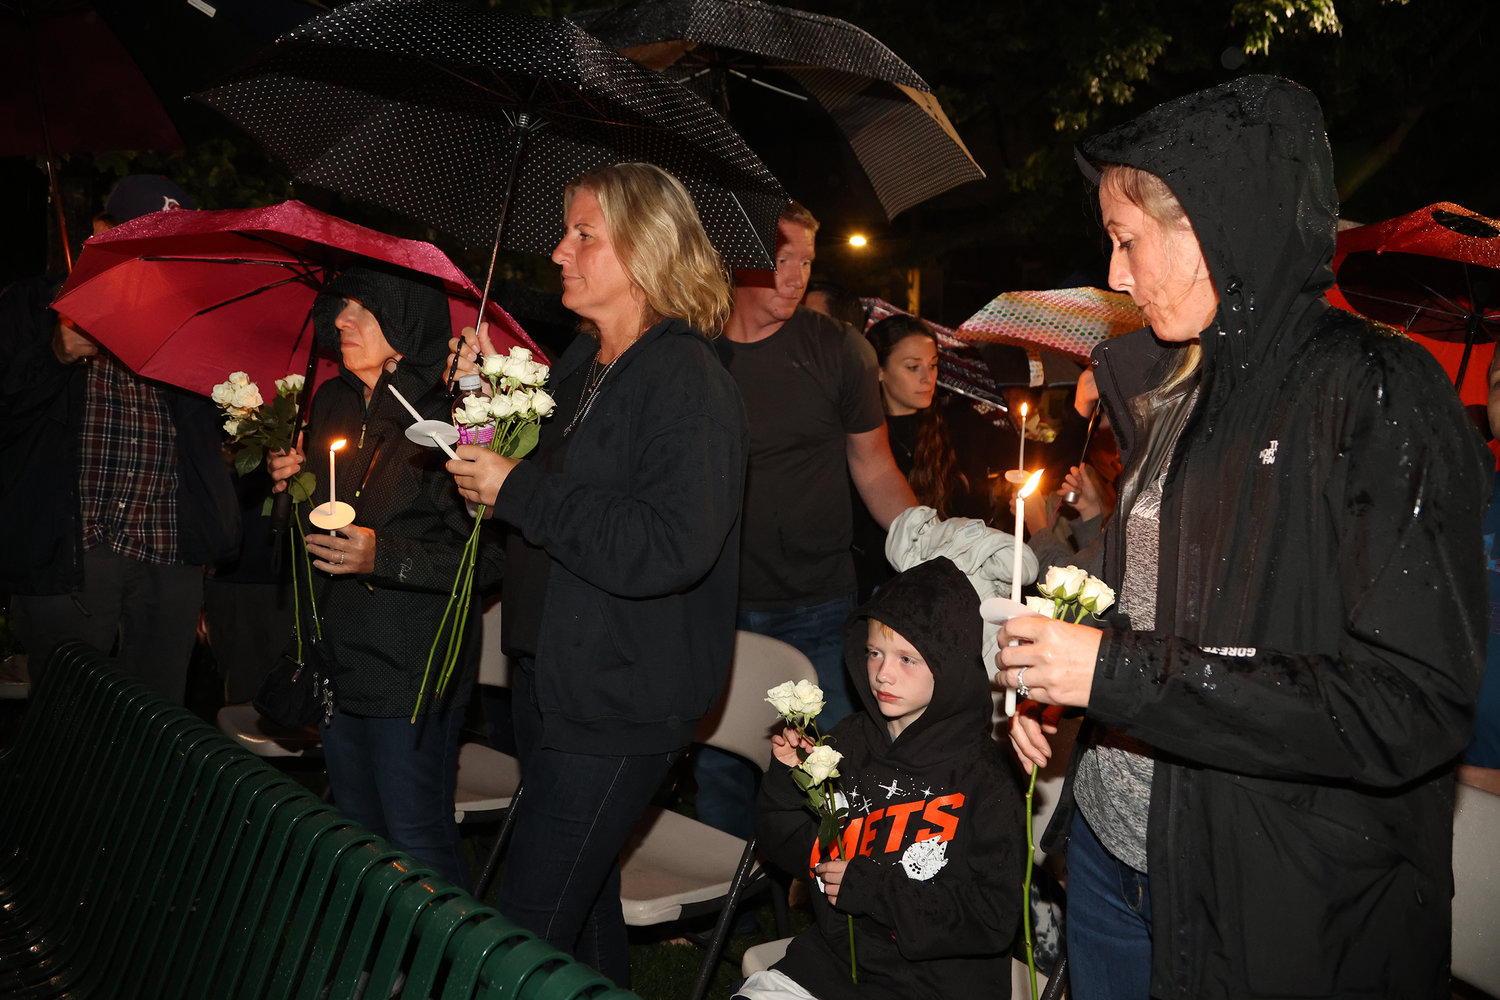 The rain did not stop many from coming to Malverne’s gazebo park to pay respects to those killed in the Sept. 11, 2001 terror attacks on the United States.